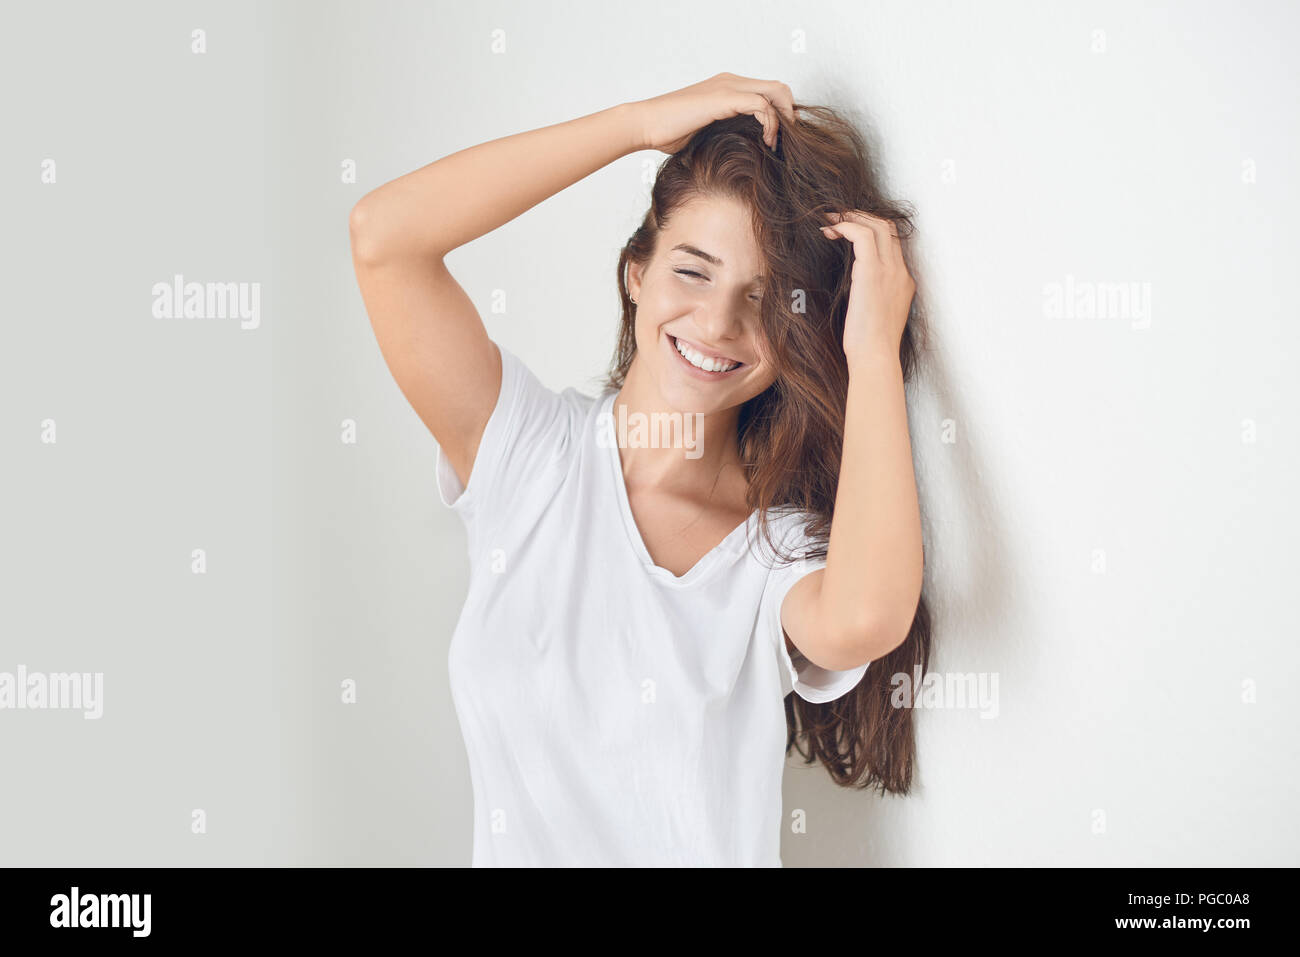 Young smiling playful blond woman holding her hair while leaning ...